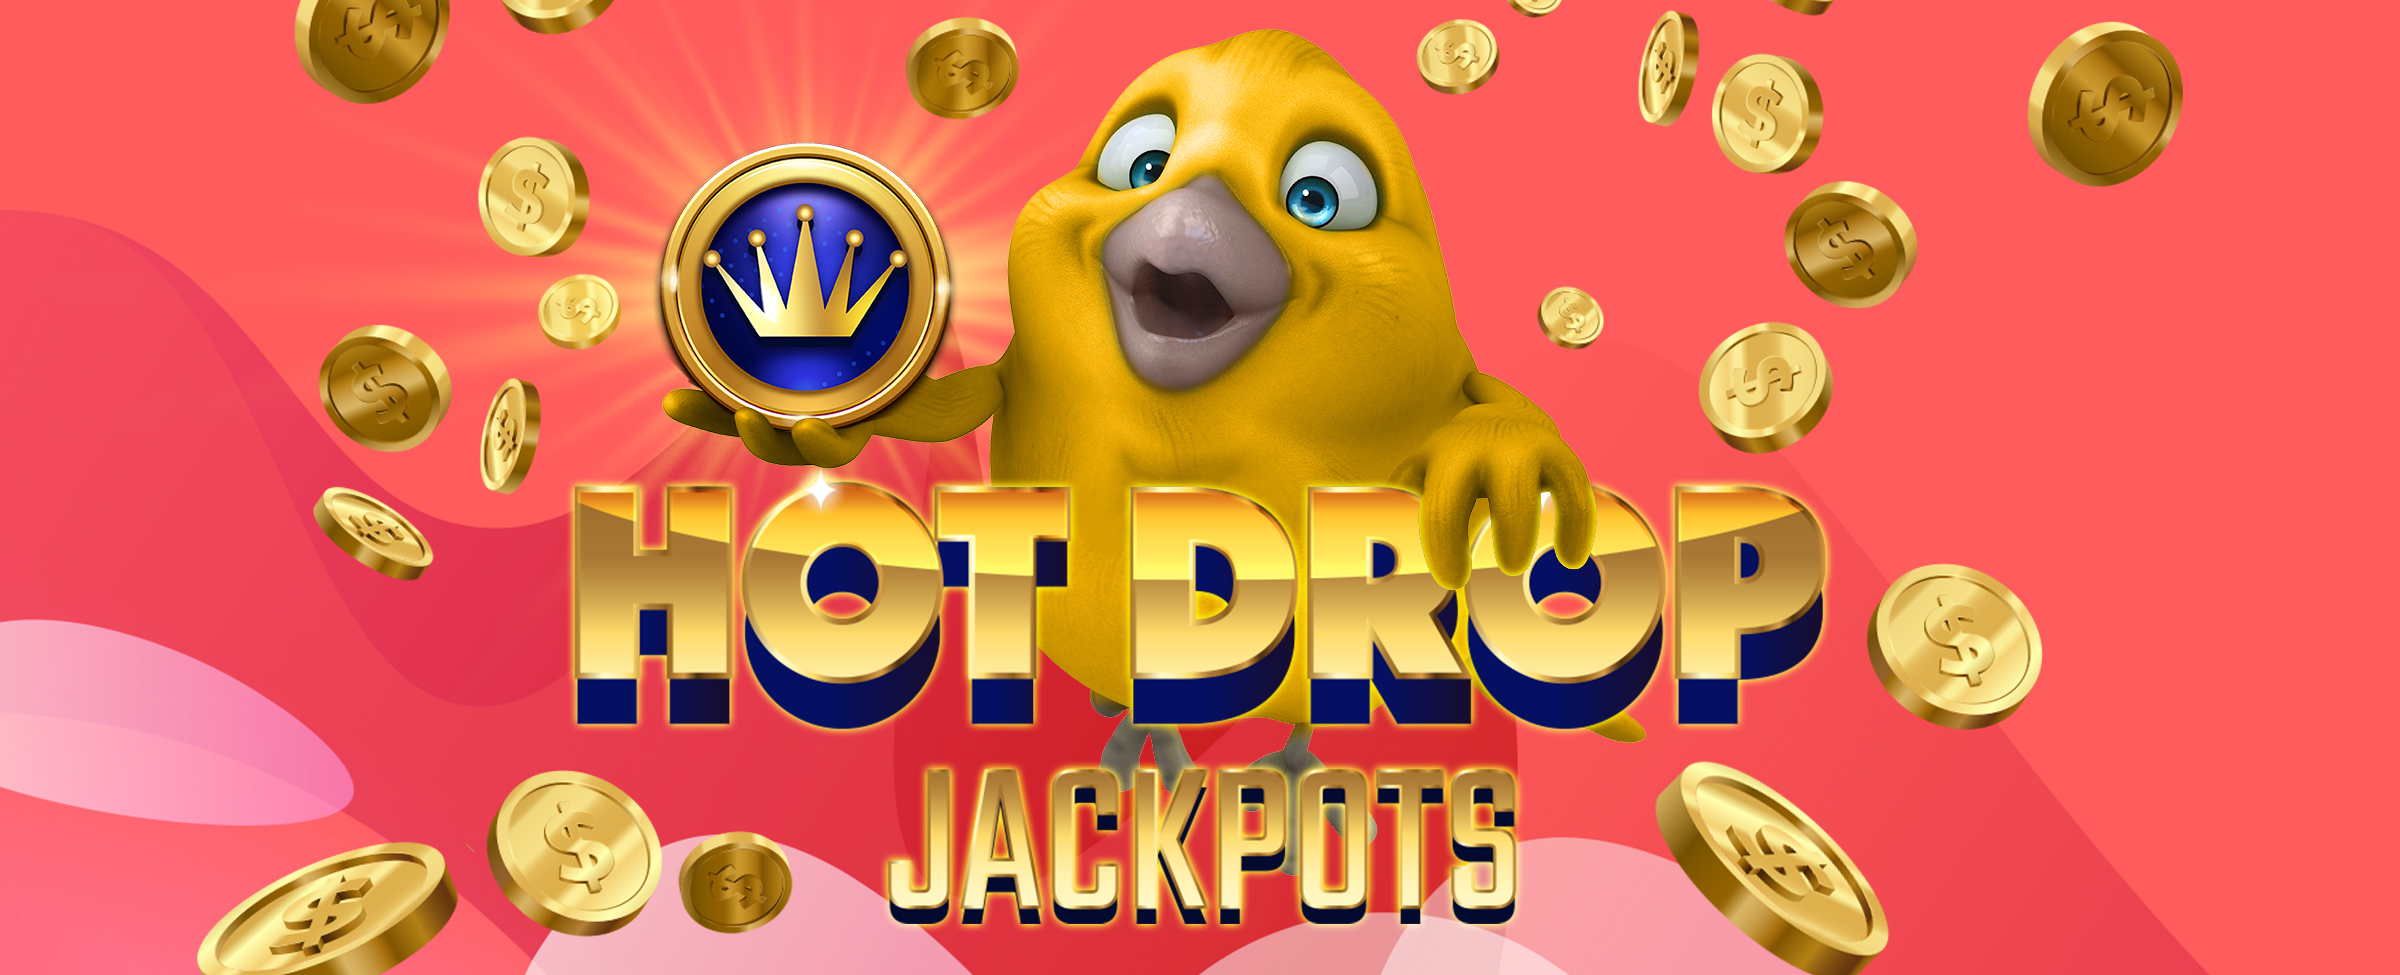 To give our playing community a leg-up, SlotsLV looks at 5 tips you can try right now to potentially win Hot Drop Jackpots at SlotsLV. Find out more here!